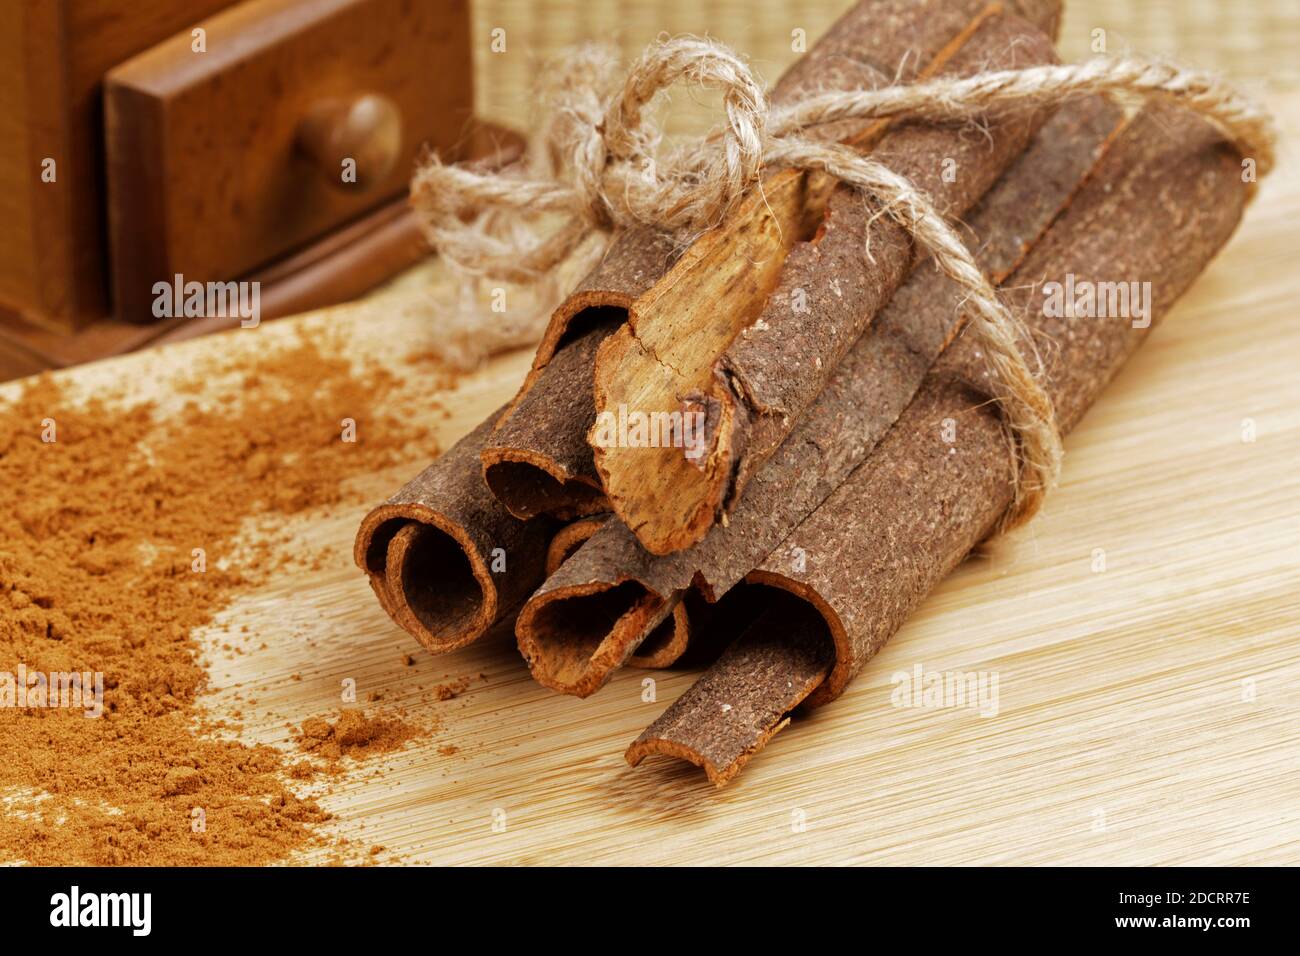 Delicious ground cinnamon and cinnamon bark on a wooden background Stock Photo